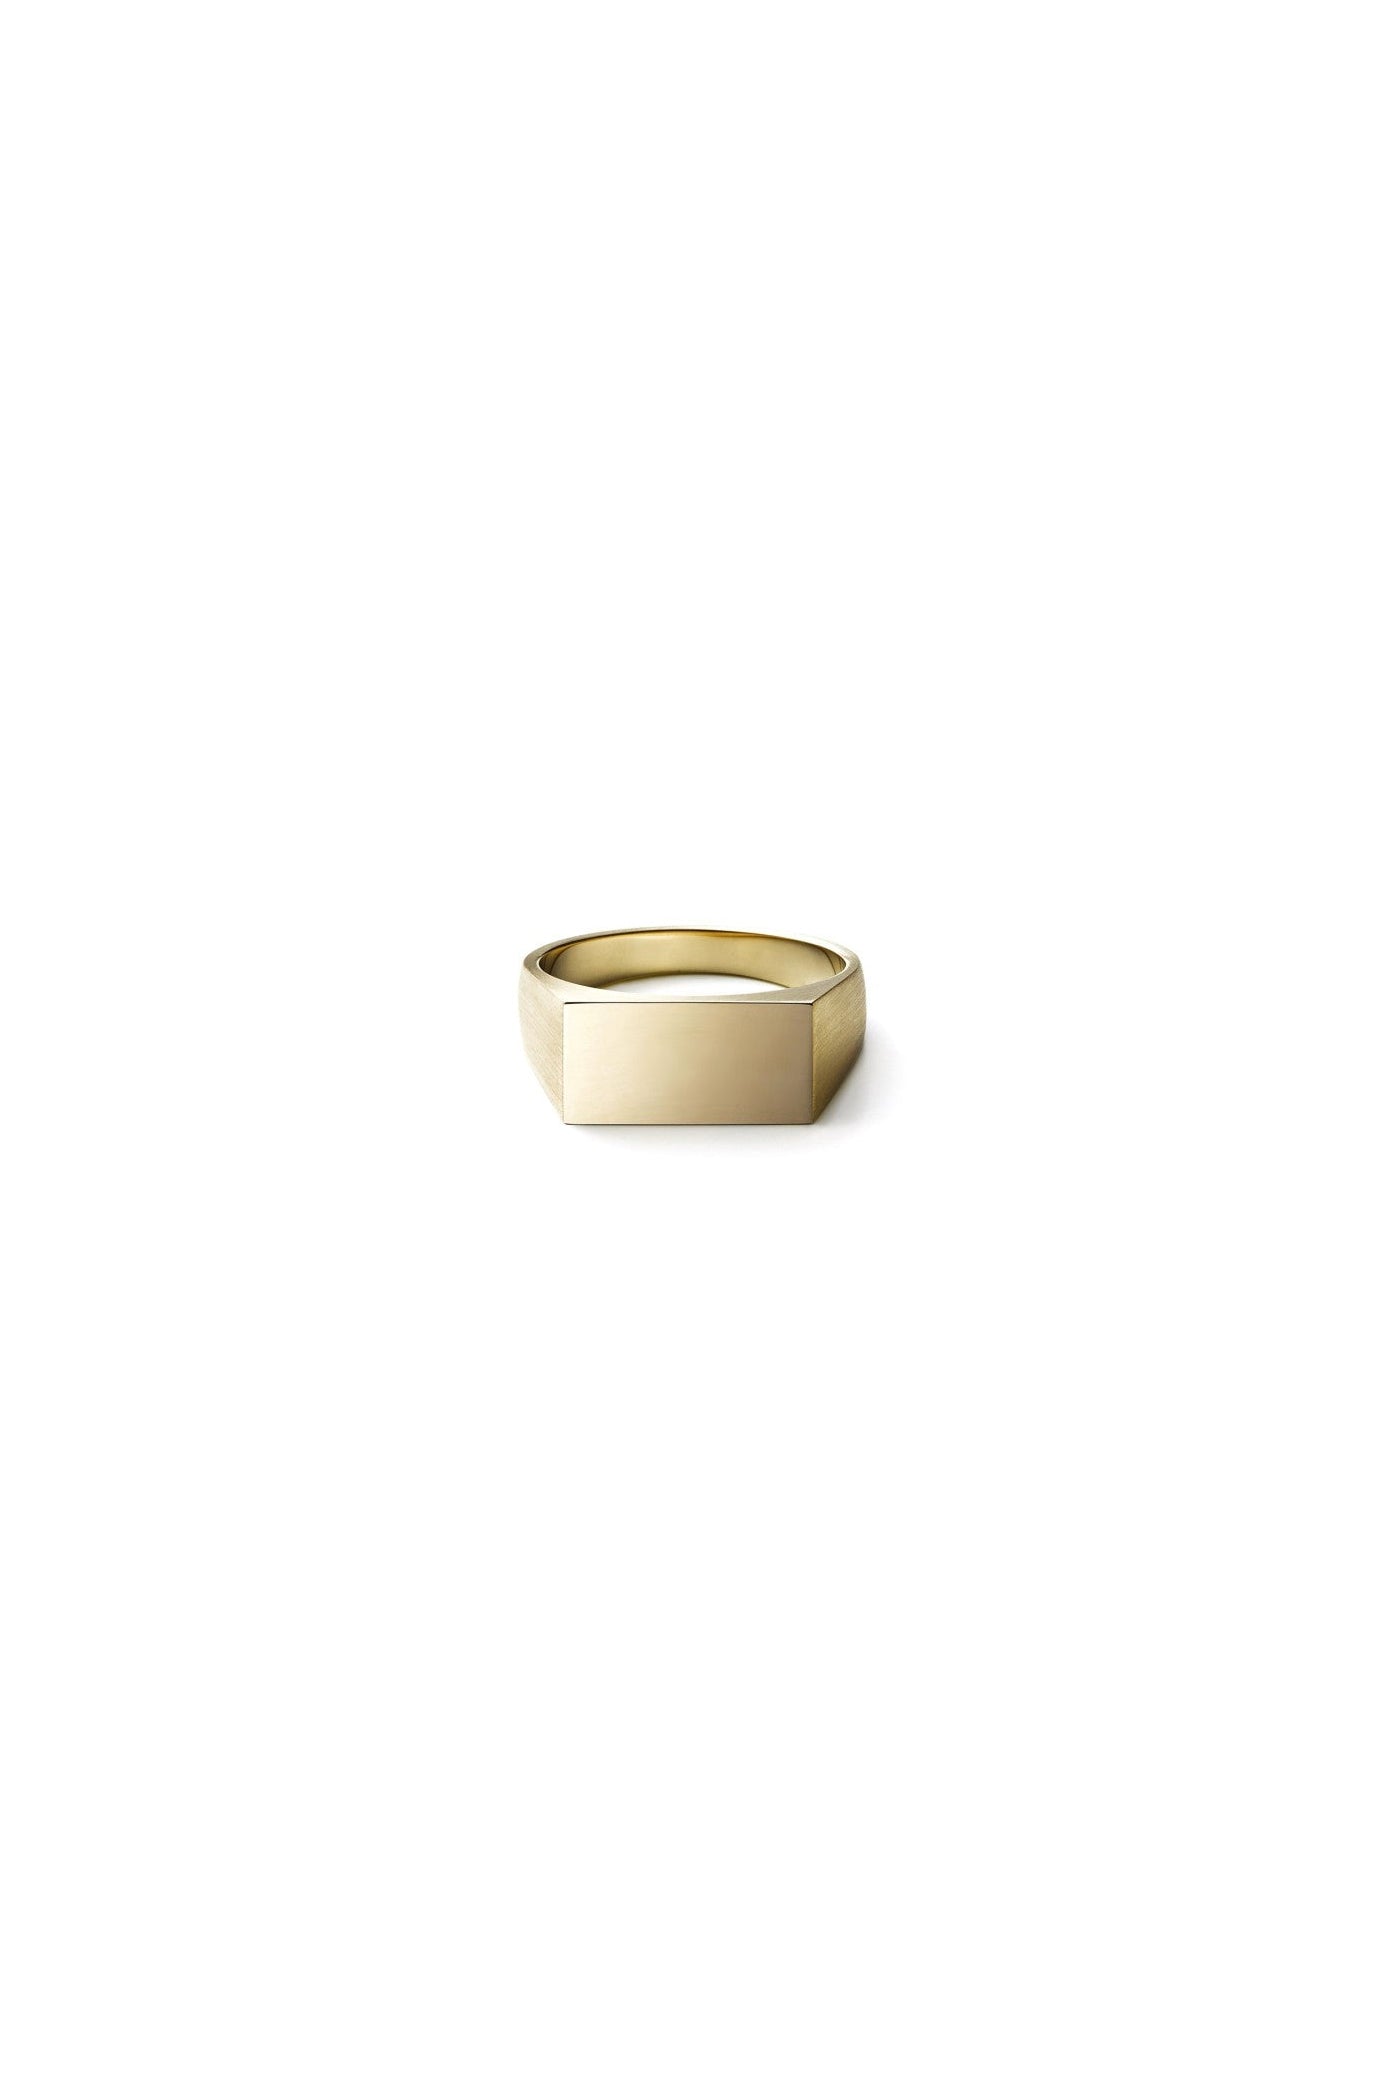 shihara SIGNET RECTANGLE RING S - リング